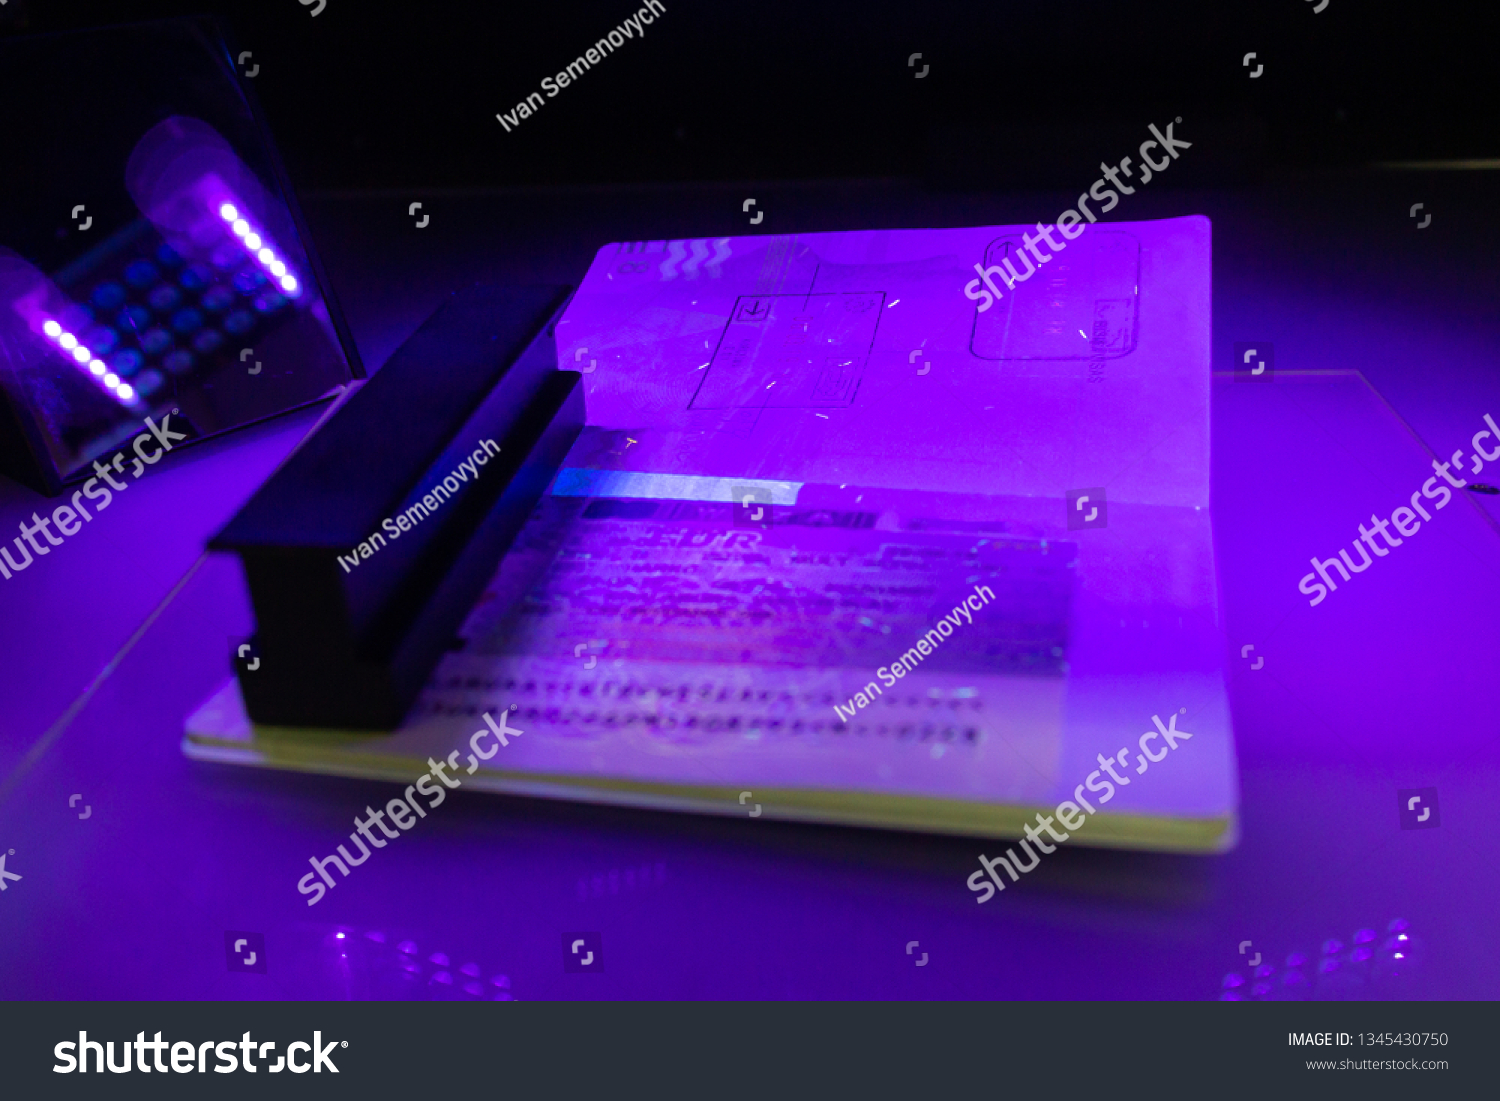 Process of the passport visa checking, close-up. The study of protective elements of the document in ultraviolet light. High security printing for for visa stickers. Passport protection against fraud #1345430750